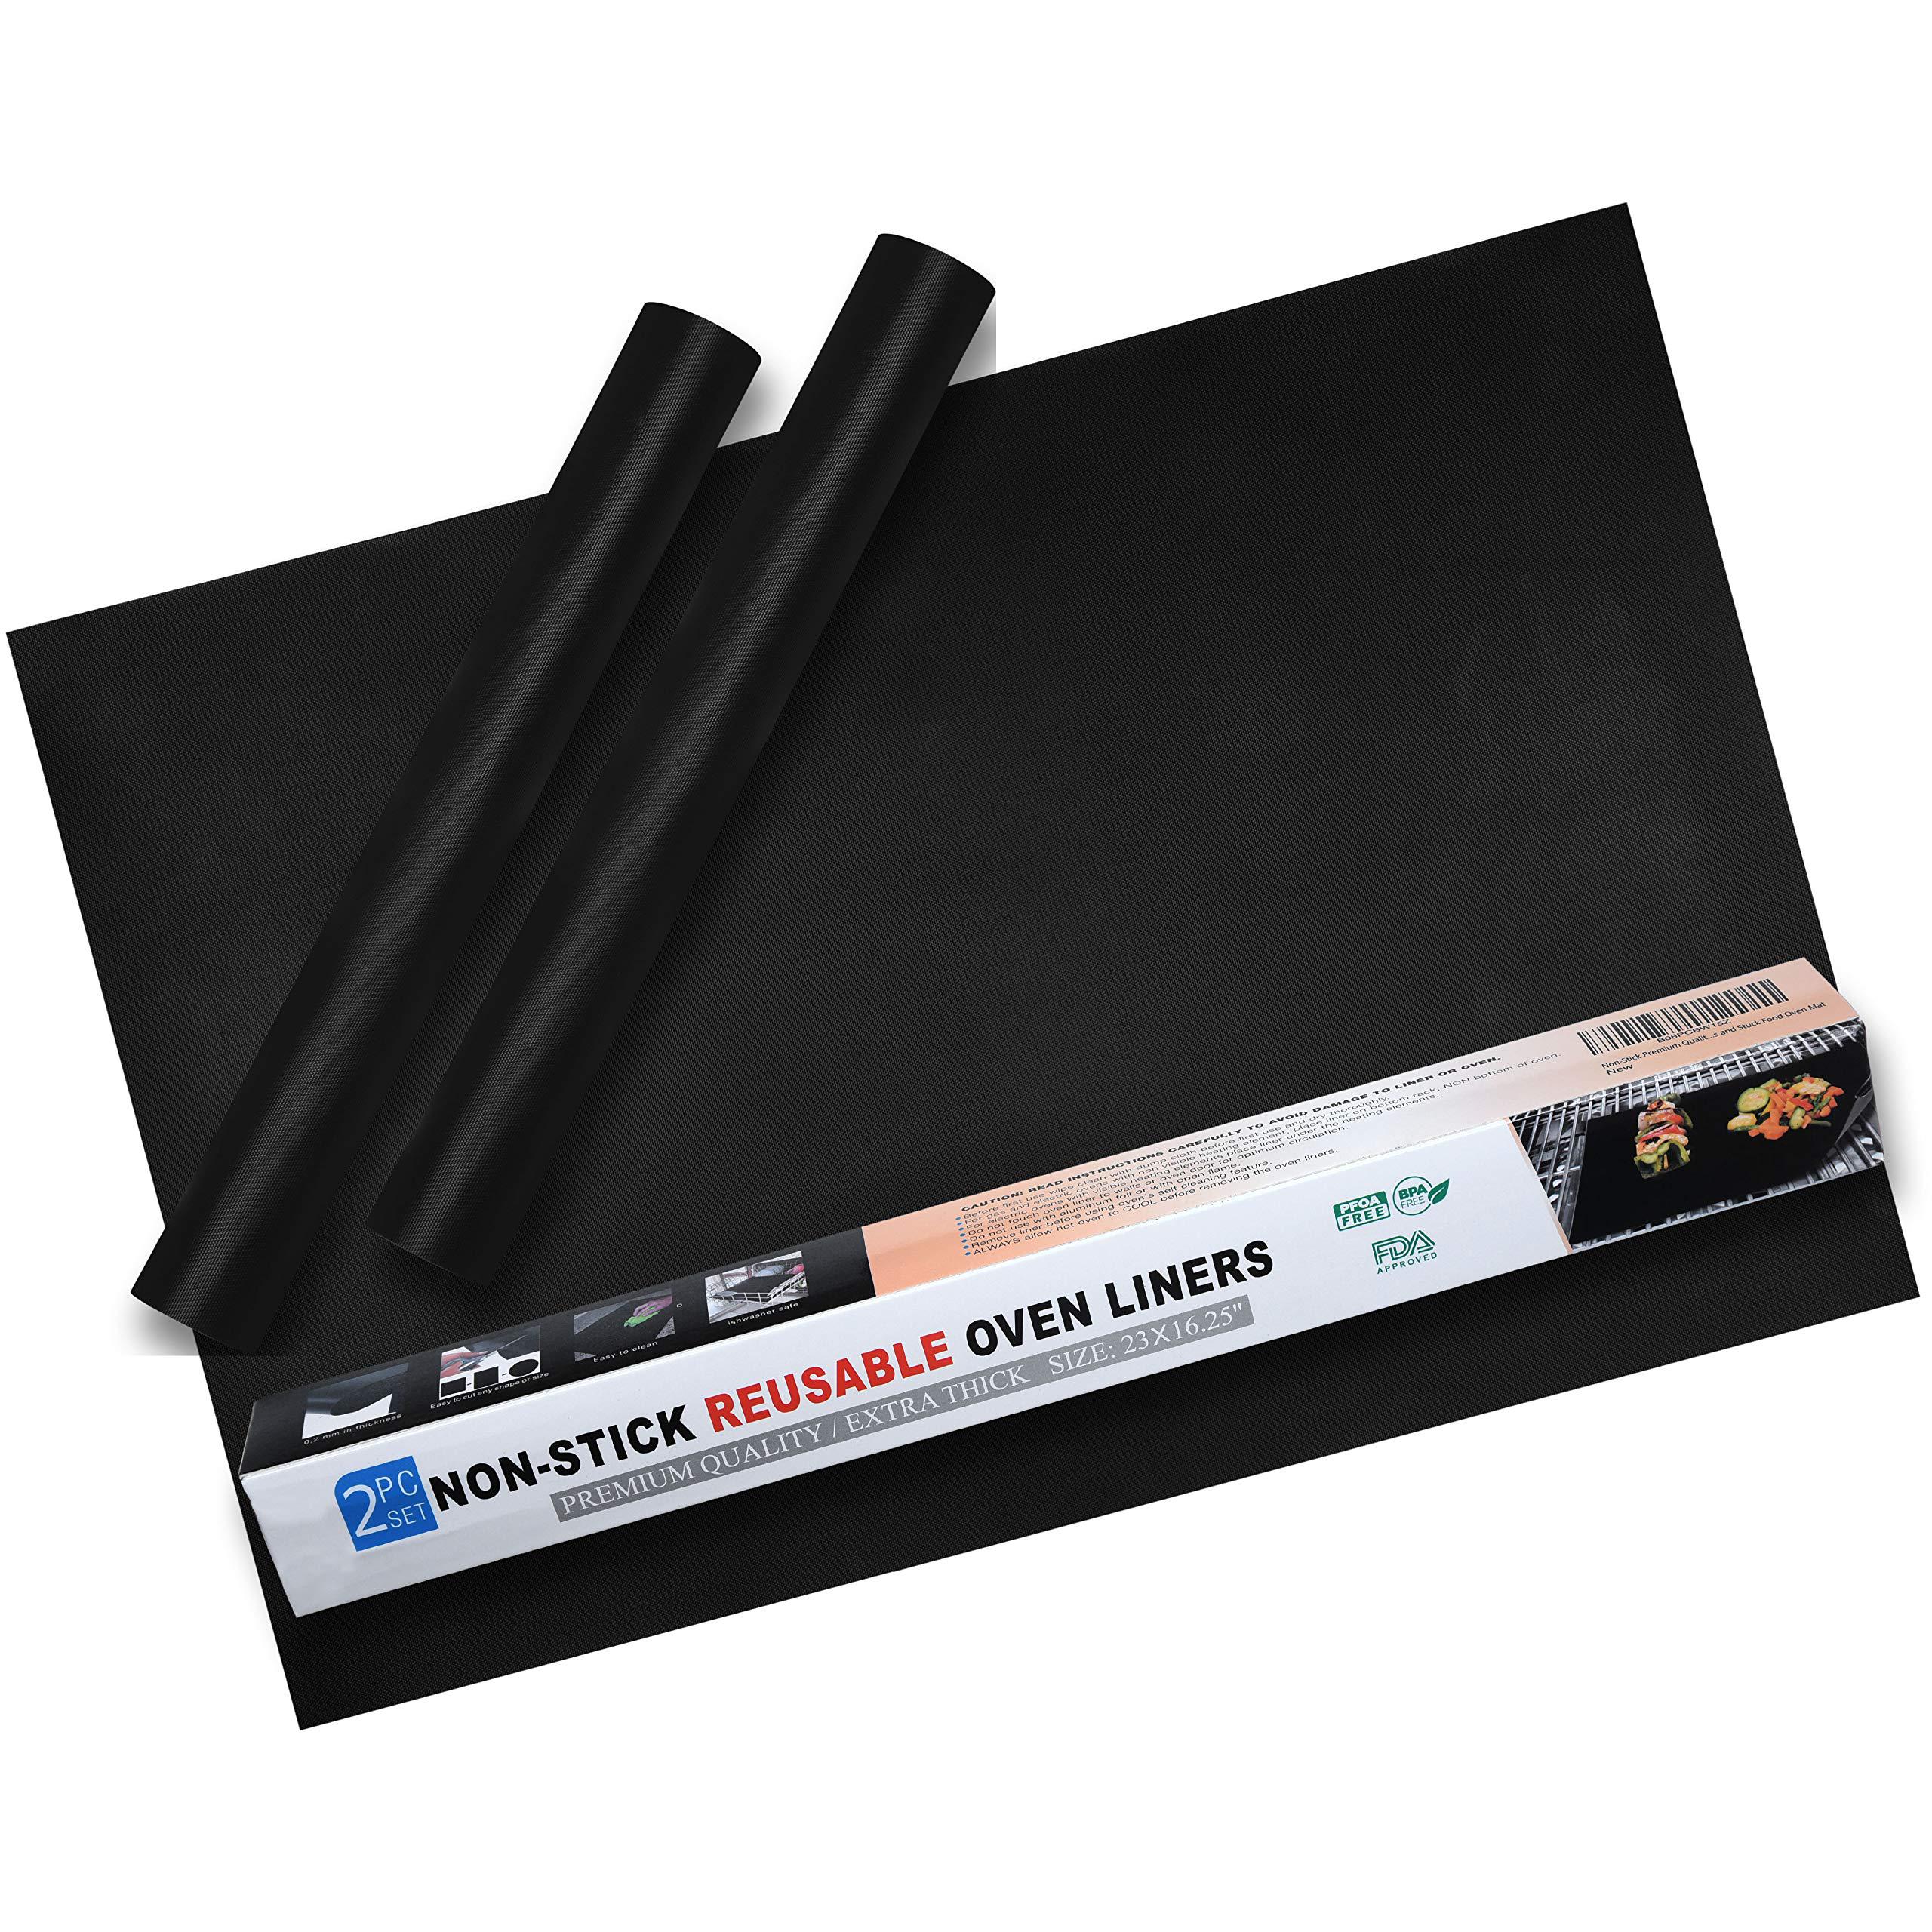 emaania oven liners for bottom of oven - 2 pack non-stick 16.5"x 23" heavy duty mats, reusable electric oven liner mat | bpa 